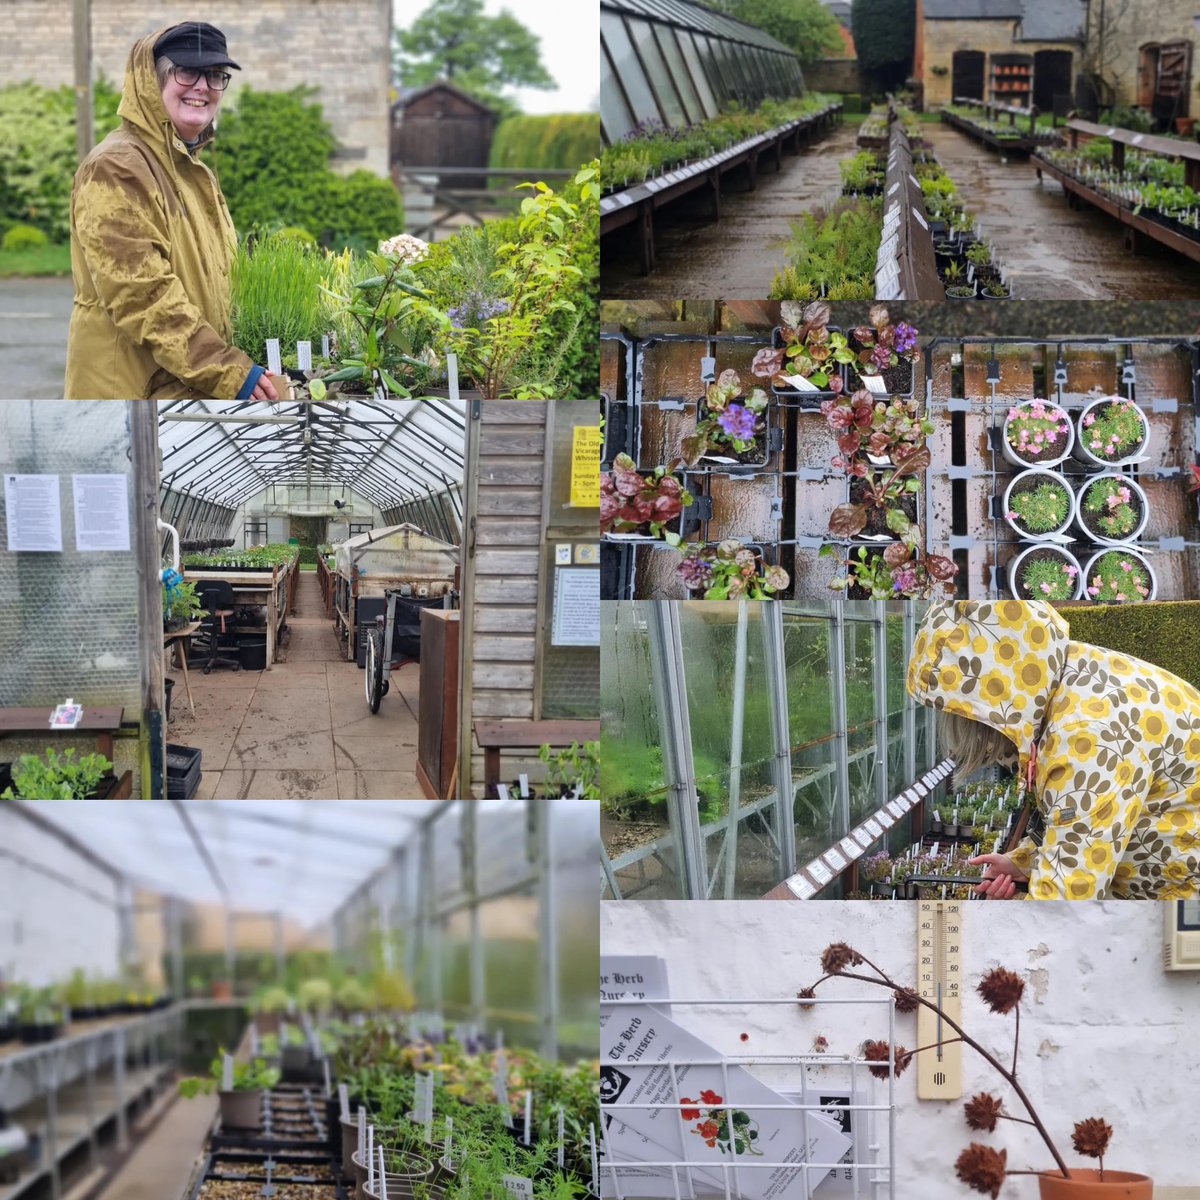 An exciting update from the Belgrave Community Garden. Great to see them supporting local business The Herb Nursery with funds from their #comunitygarden grant. We can't wait to see it all growing🌱 #supportlocalbusiness herbnursery.co.uk linktr.ee/belgravecommun…